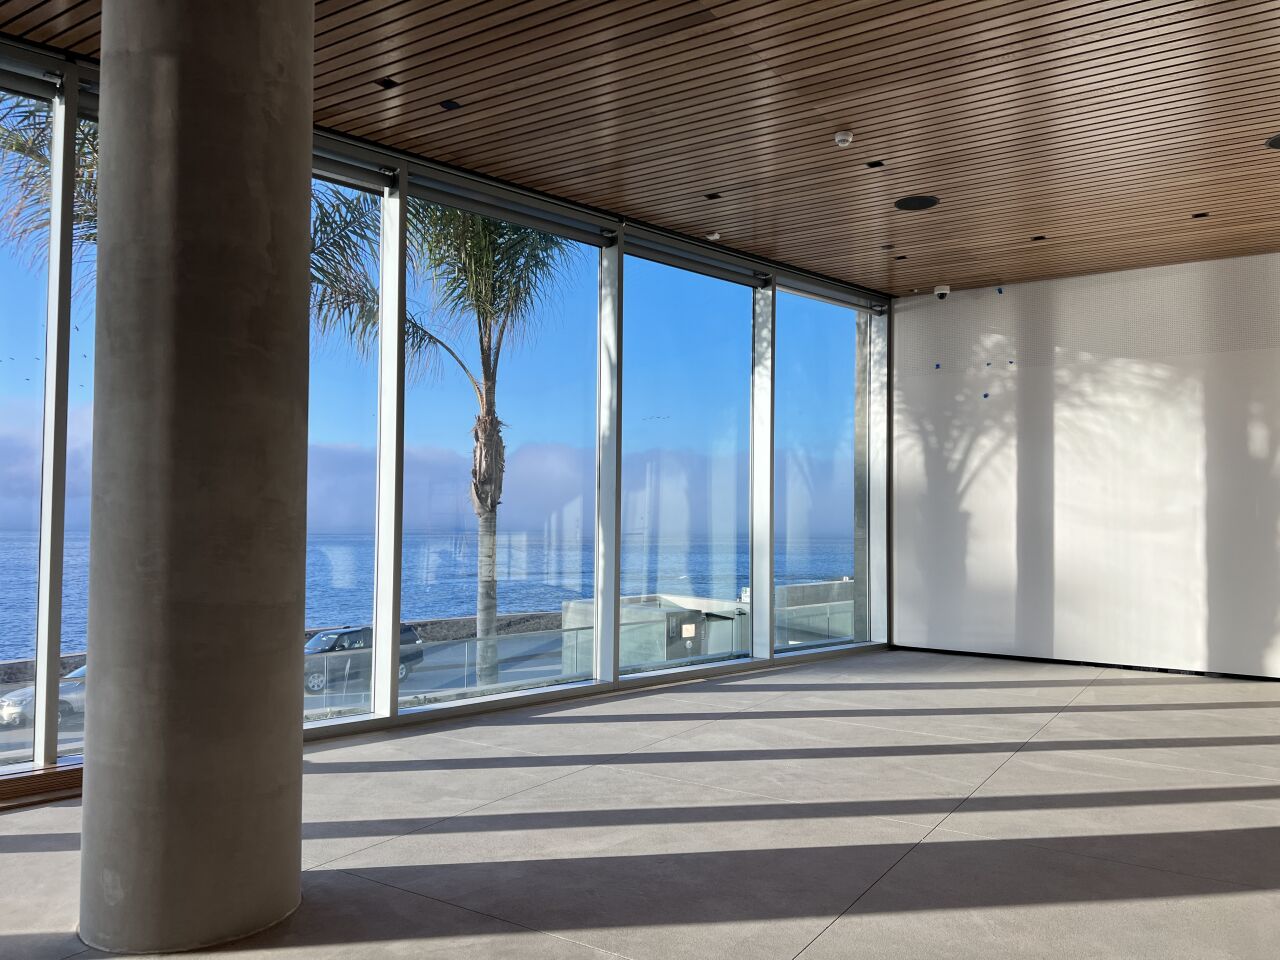 Jacobs Hall, facing the ocean, features oak ceilings and acoustical drywall for events.